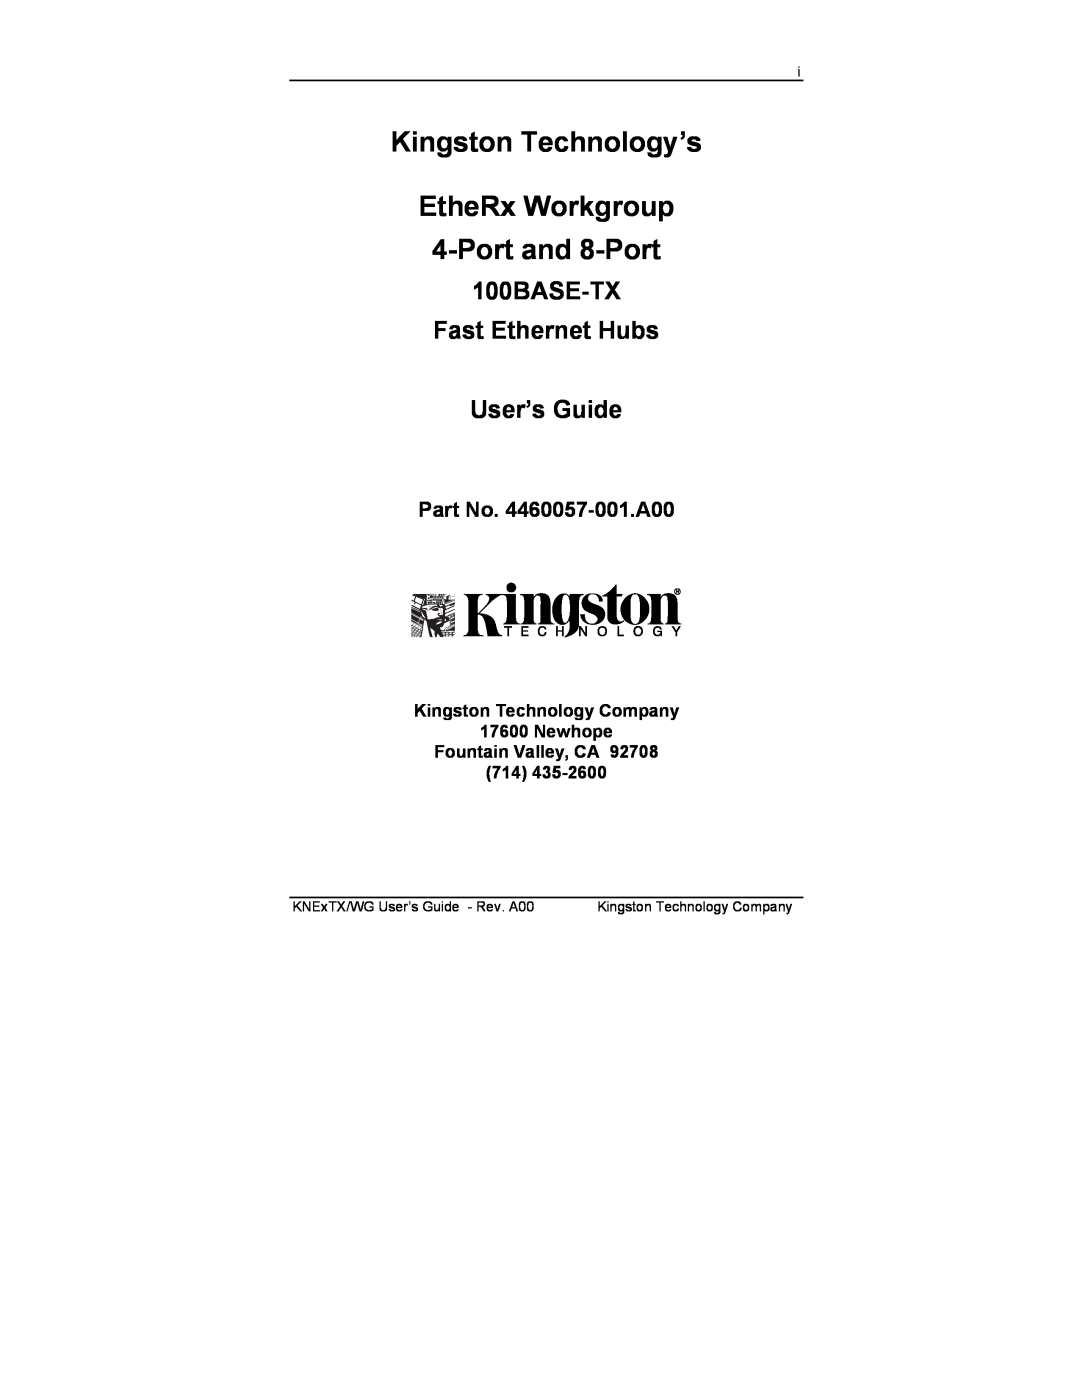 Kingston Technology KNE8TX/WG manual Kingston Technology’s EtheRx Workgroup 4-Port and 8-Port, Part No. 4460057-001.A00 